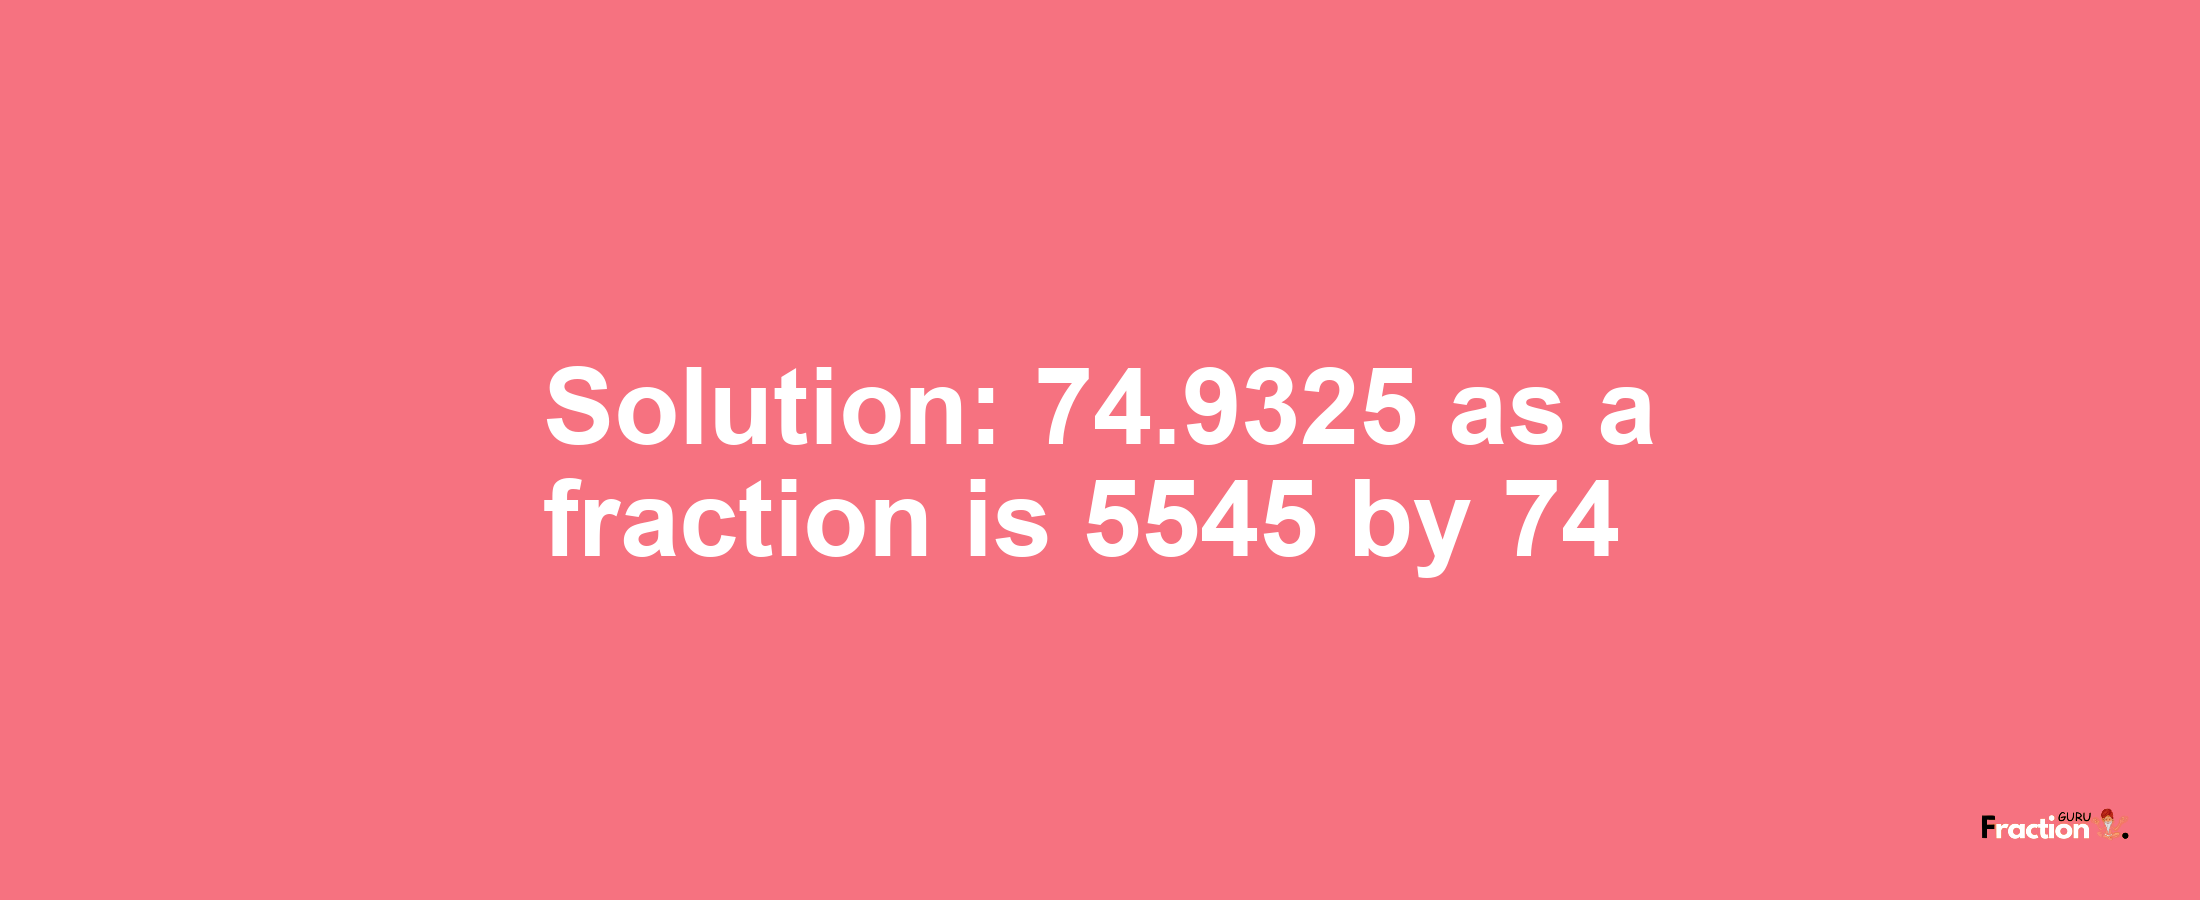 Solution:74.9325 as a fraction is 5545/74